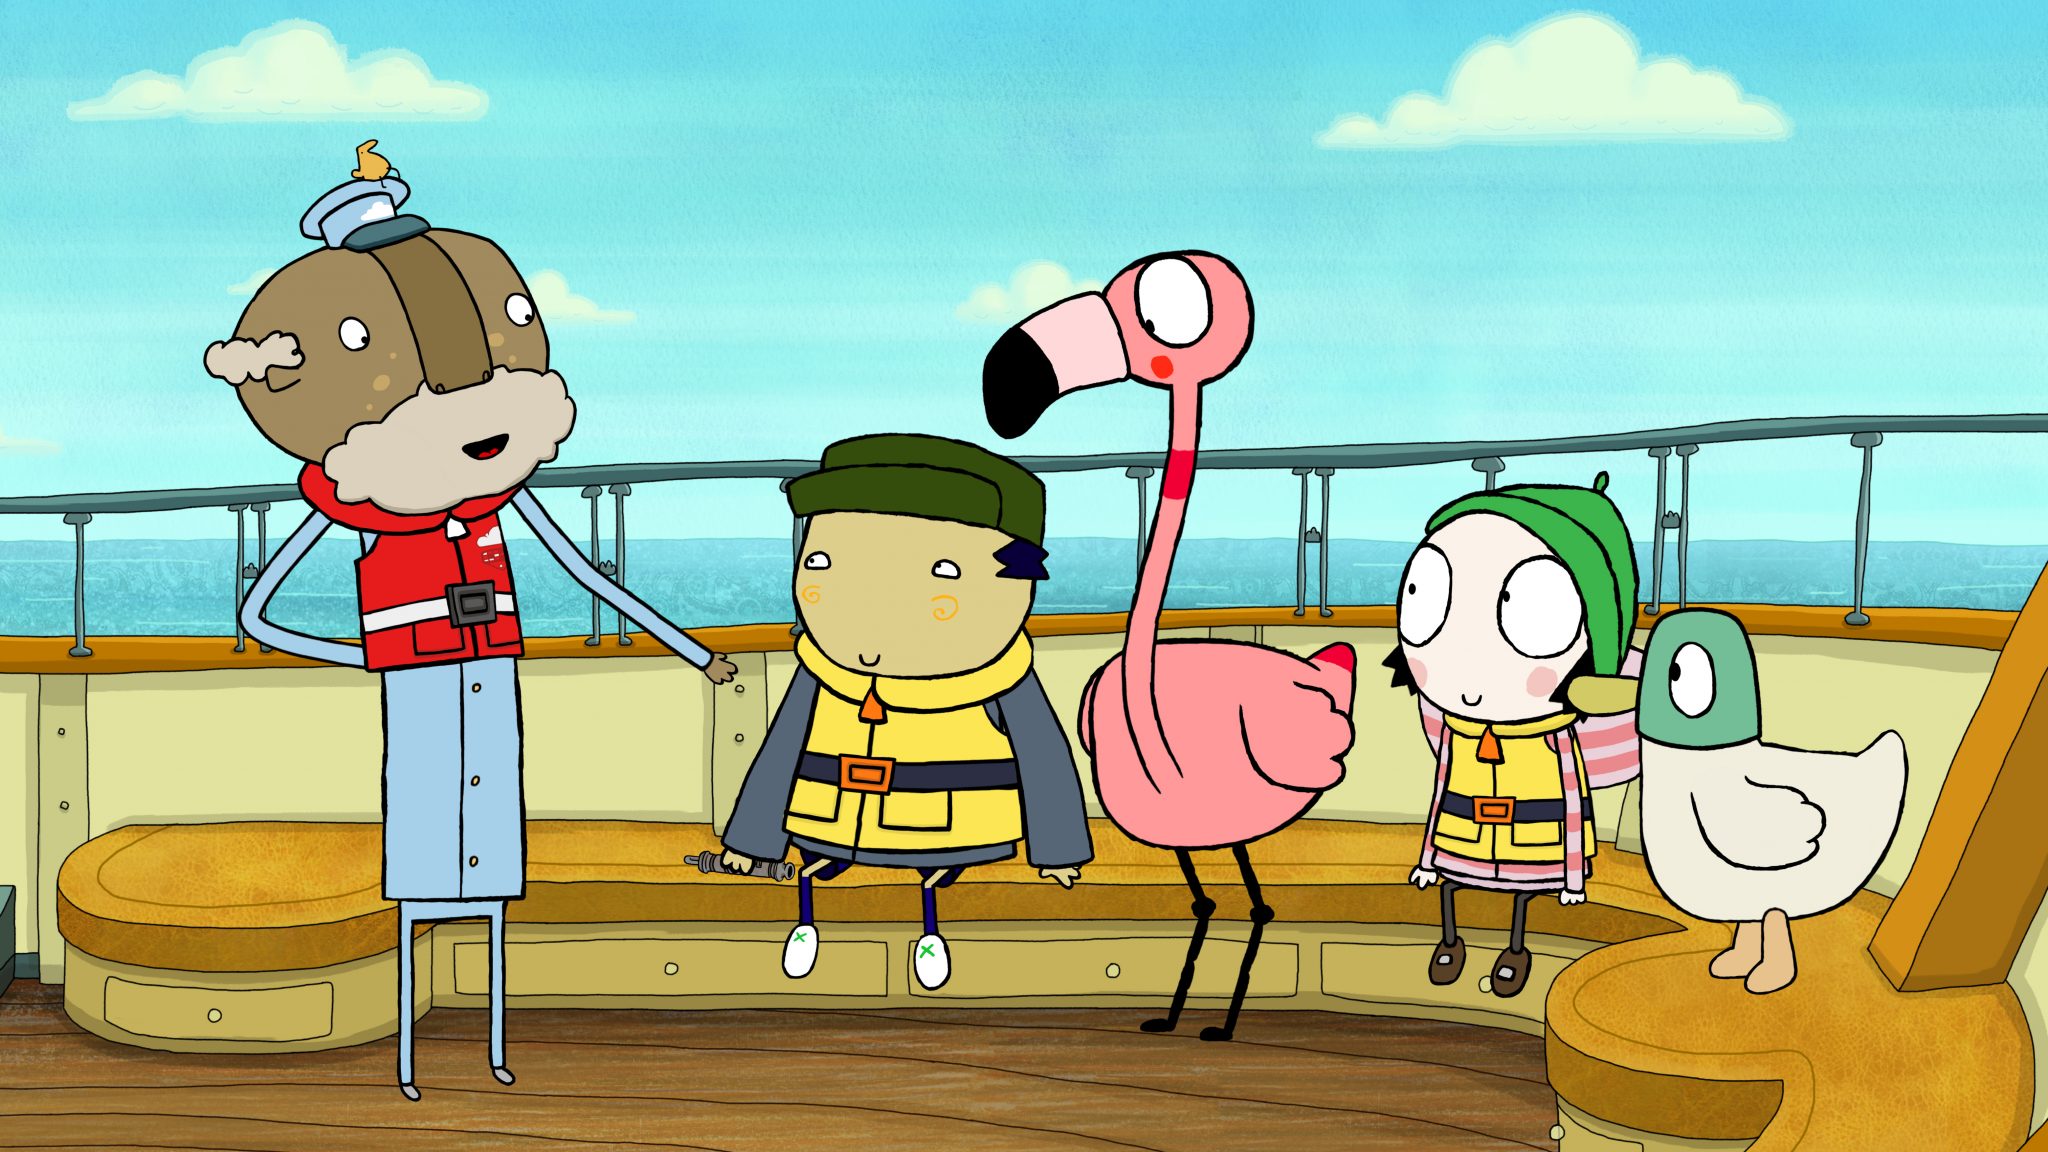 Sarah and Duck, image courtesy of Karrot Animation.